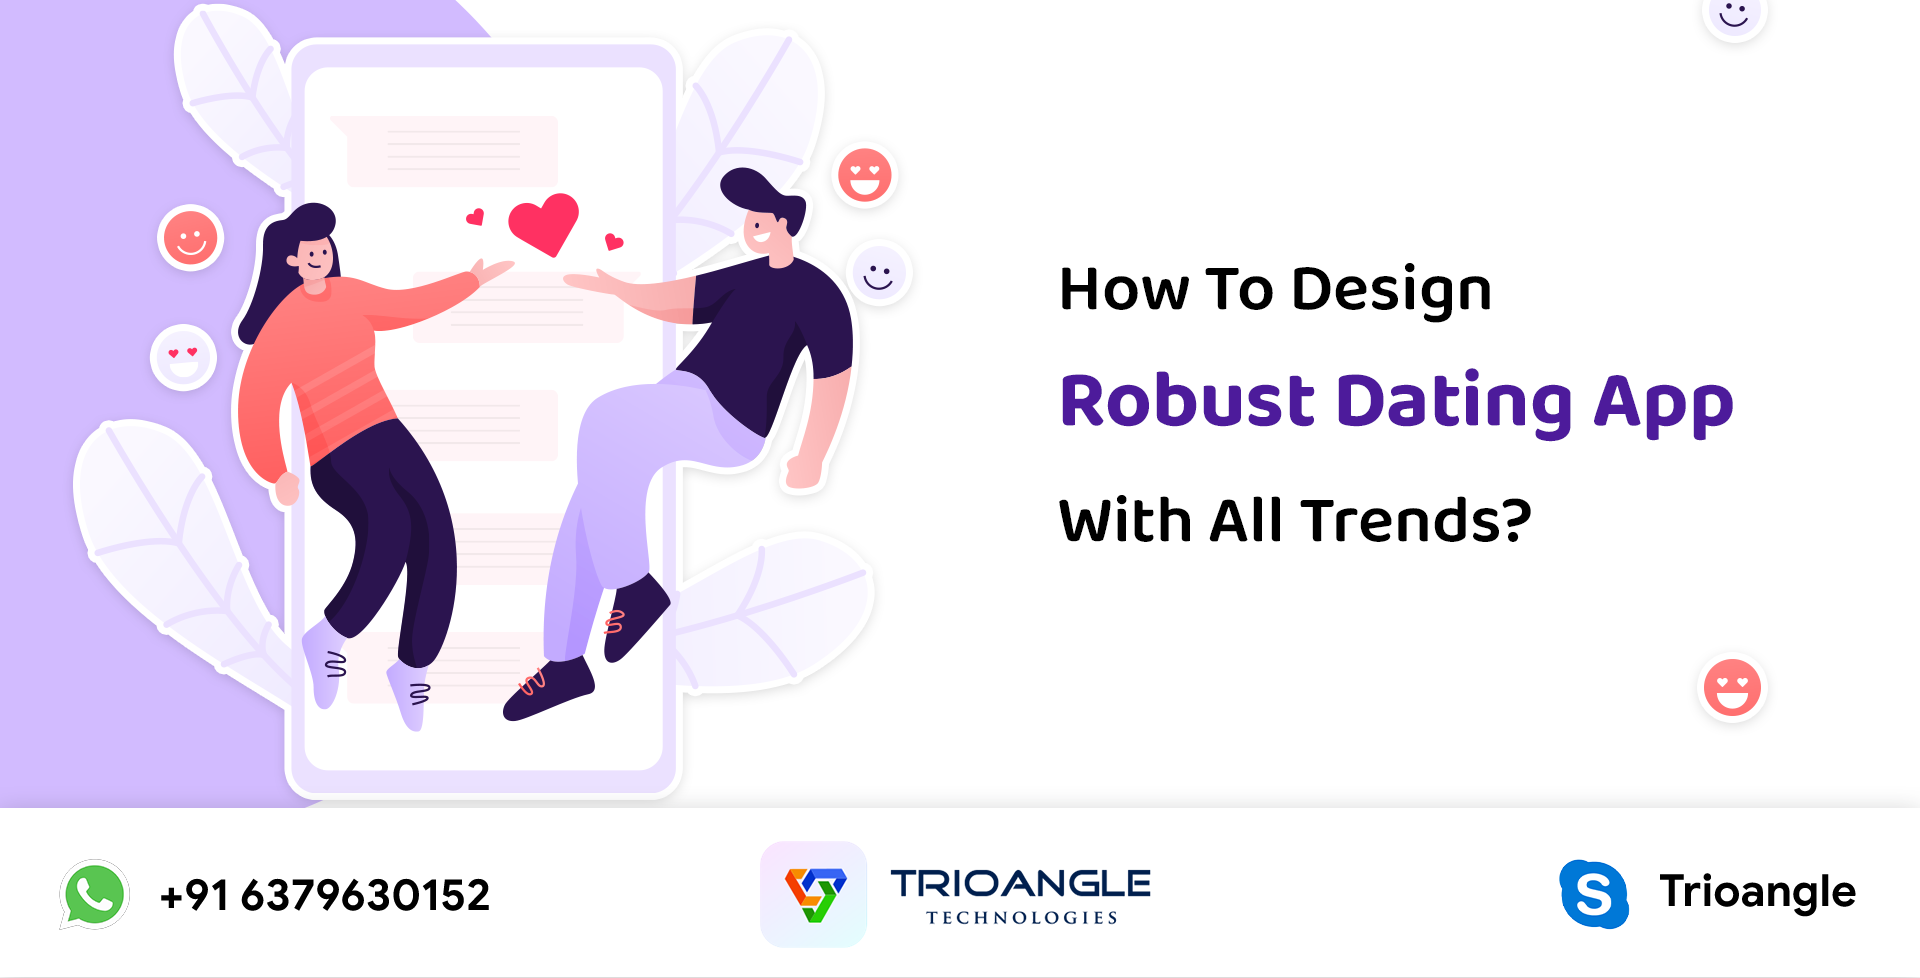 How To Design Robust Dating App With All Trends?